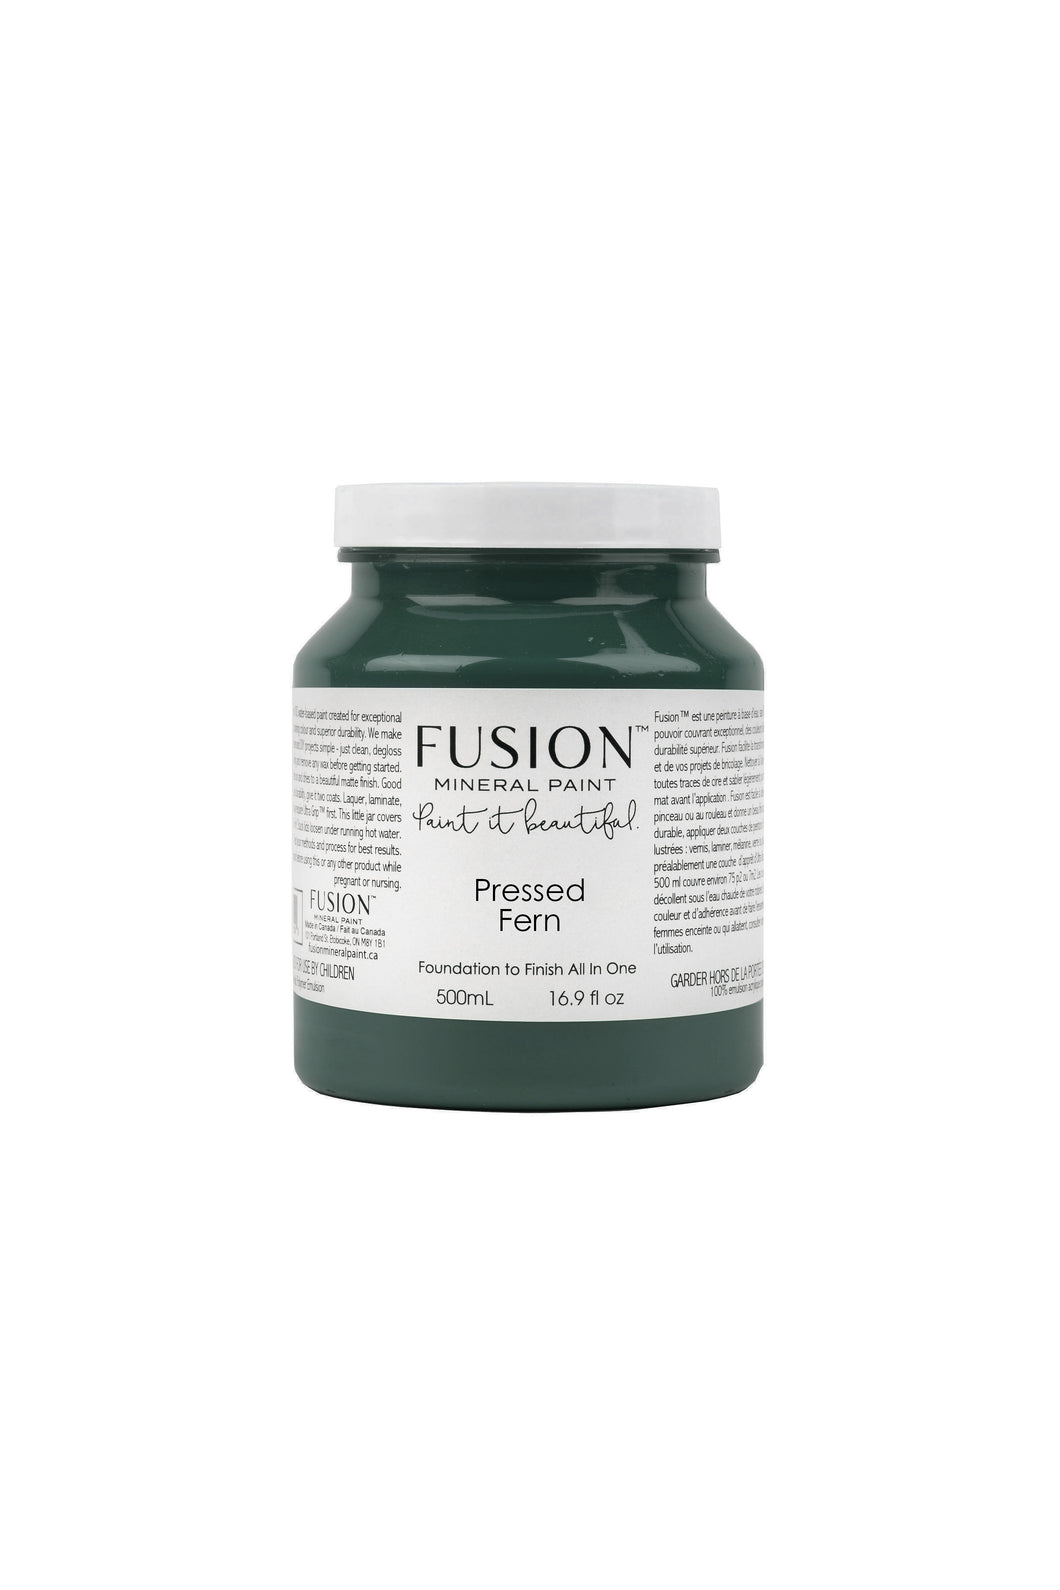 Fusion mineral paint | Pressed Fern | 500ml | Colour Me KT